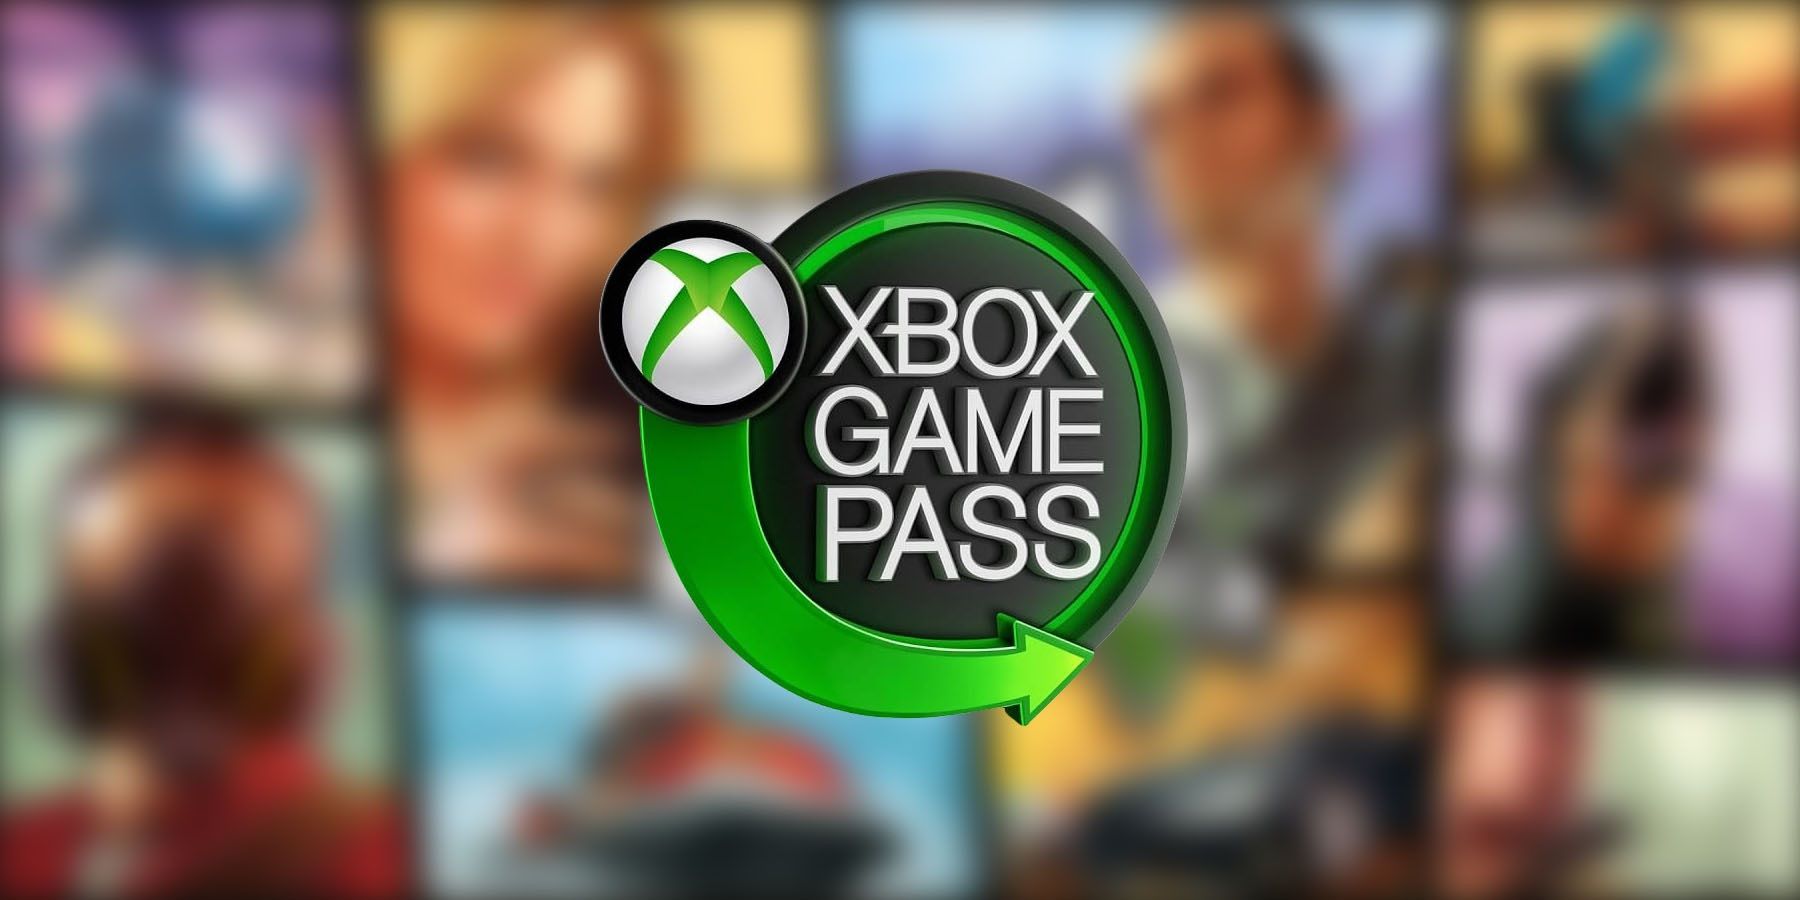 Grand Theft Auto V is now available on Xbox Game Pass for Console